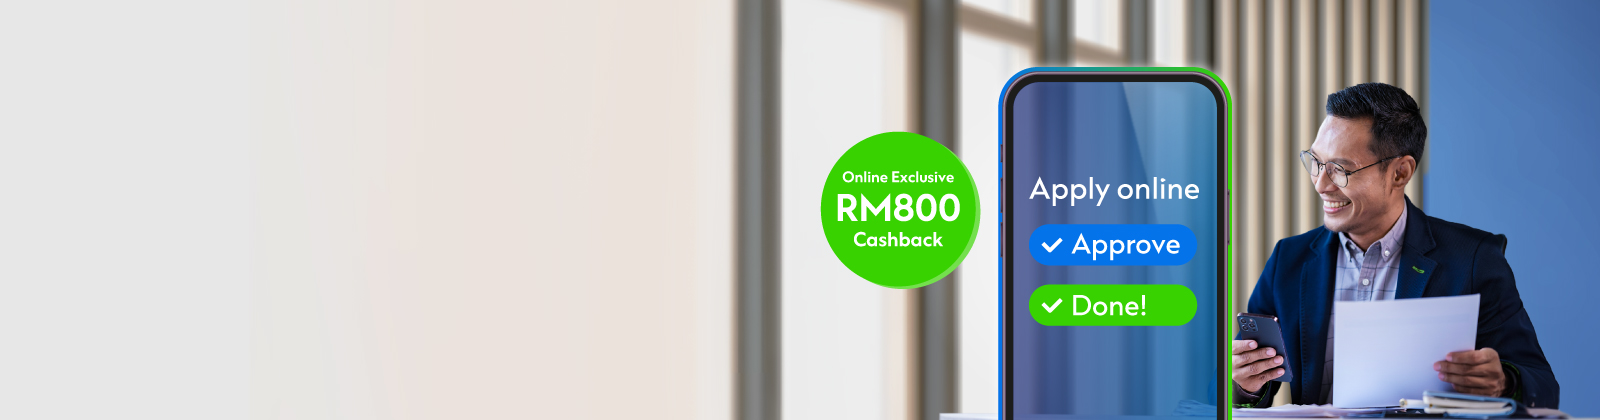 Apply online, get approved in 1 day and receive RM800 cashback. T&Cs apply. 